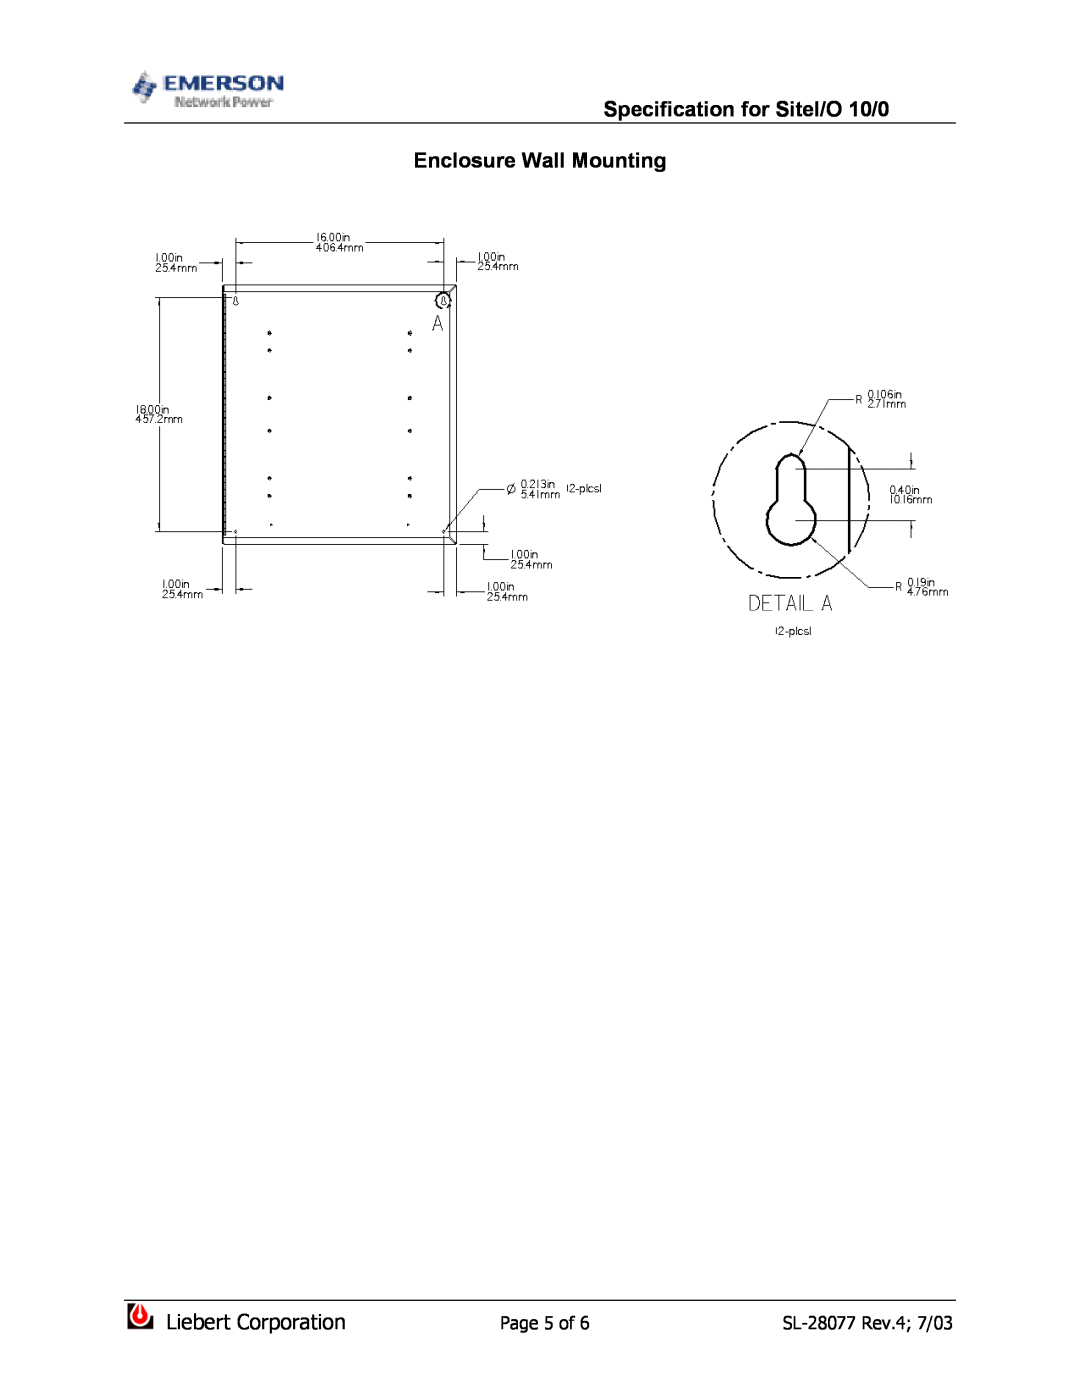 Emerson SiteI/O-Line dimensions Enclosure Wall Mounting, Page 5 of, Specification for SiteI/O 10/0, Liebert Corporation 